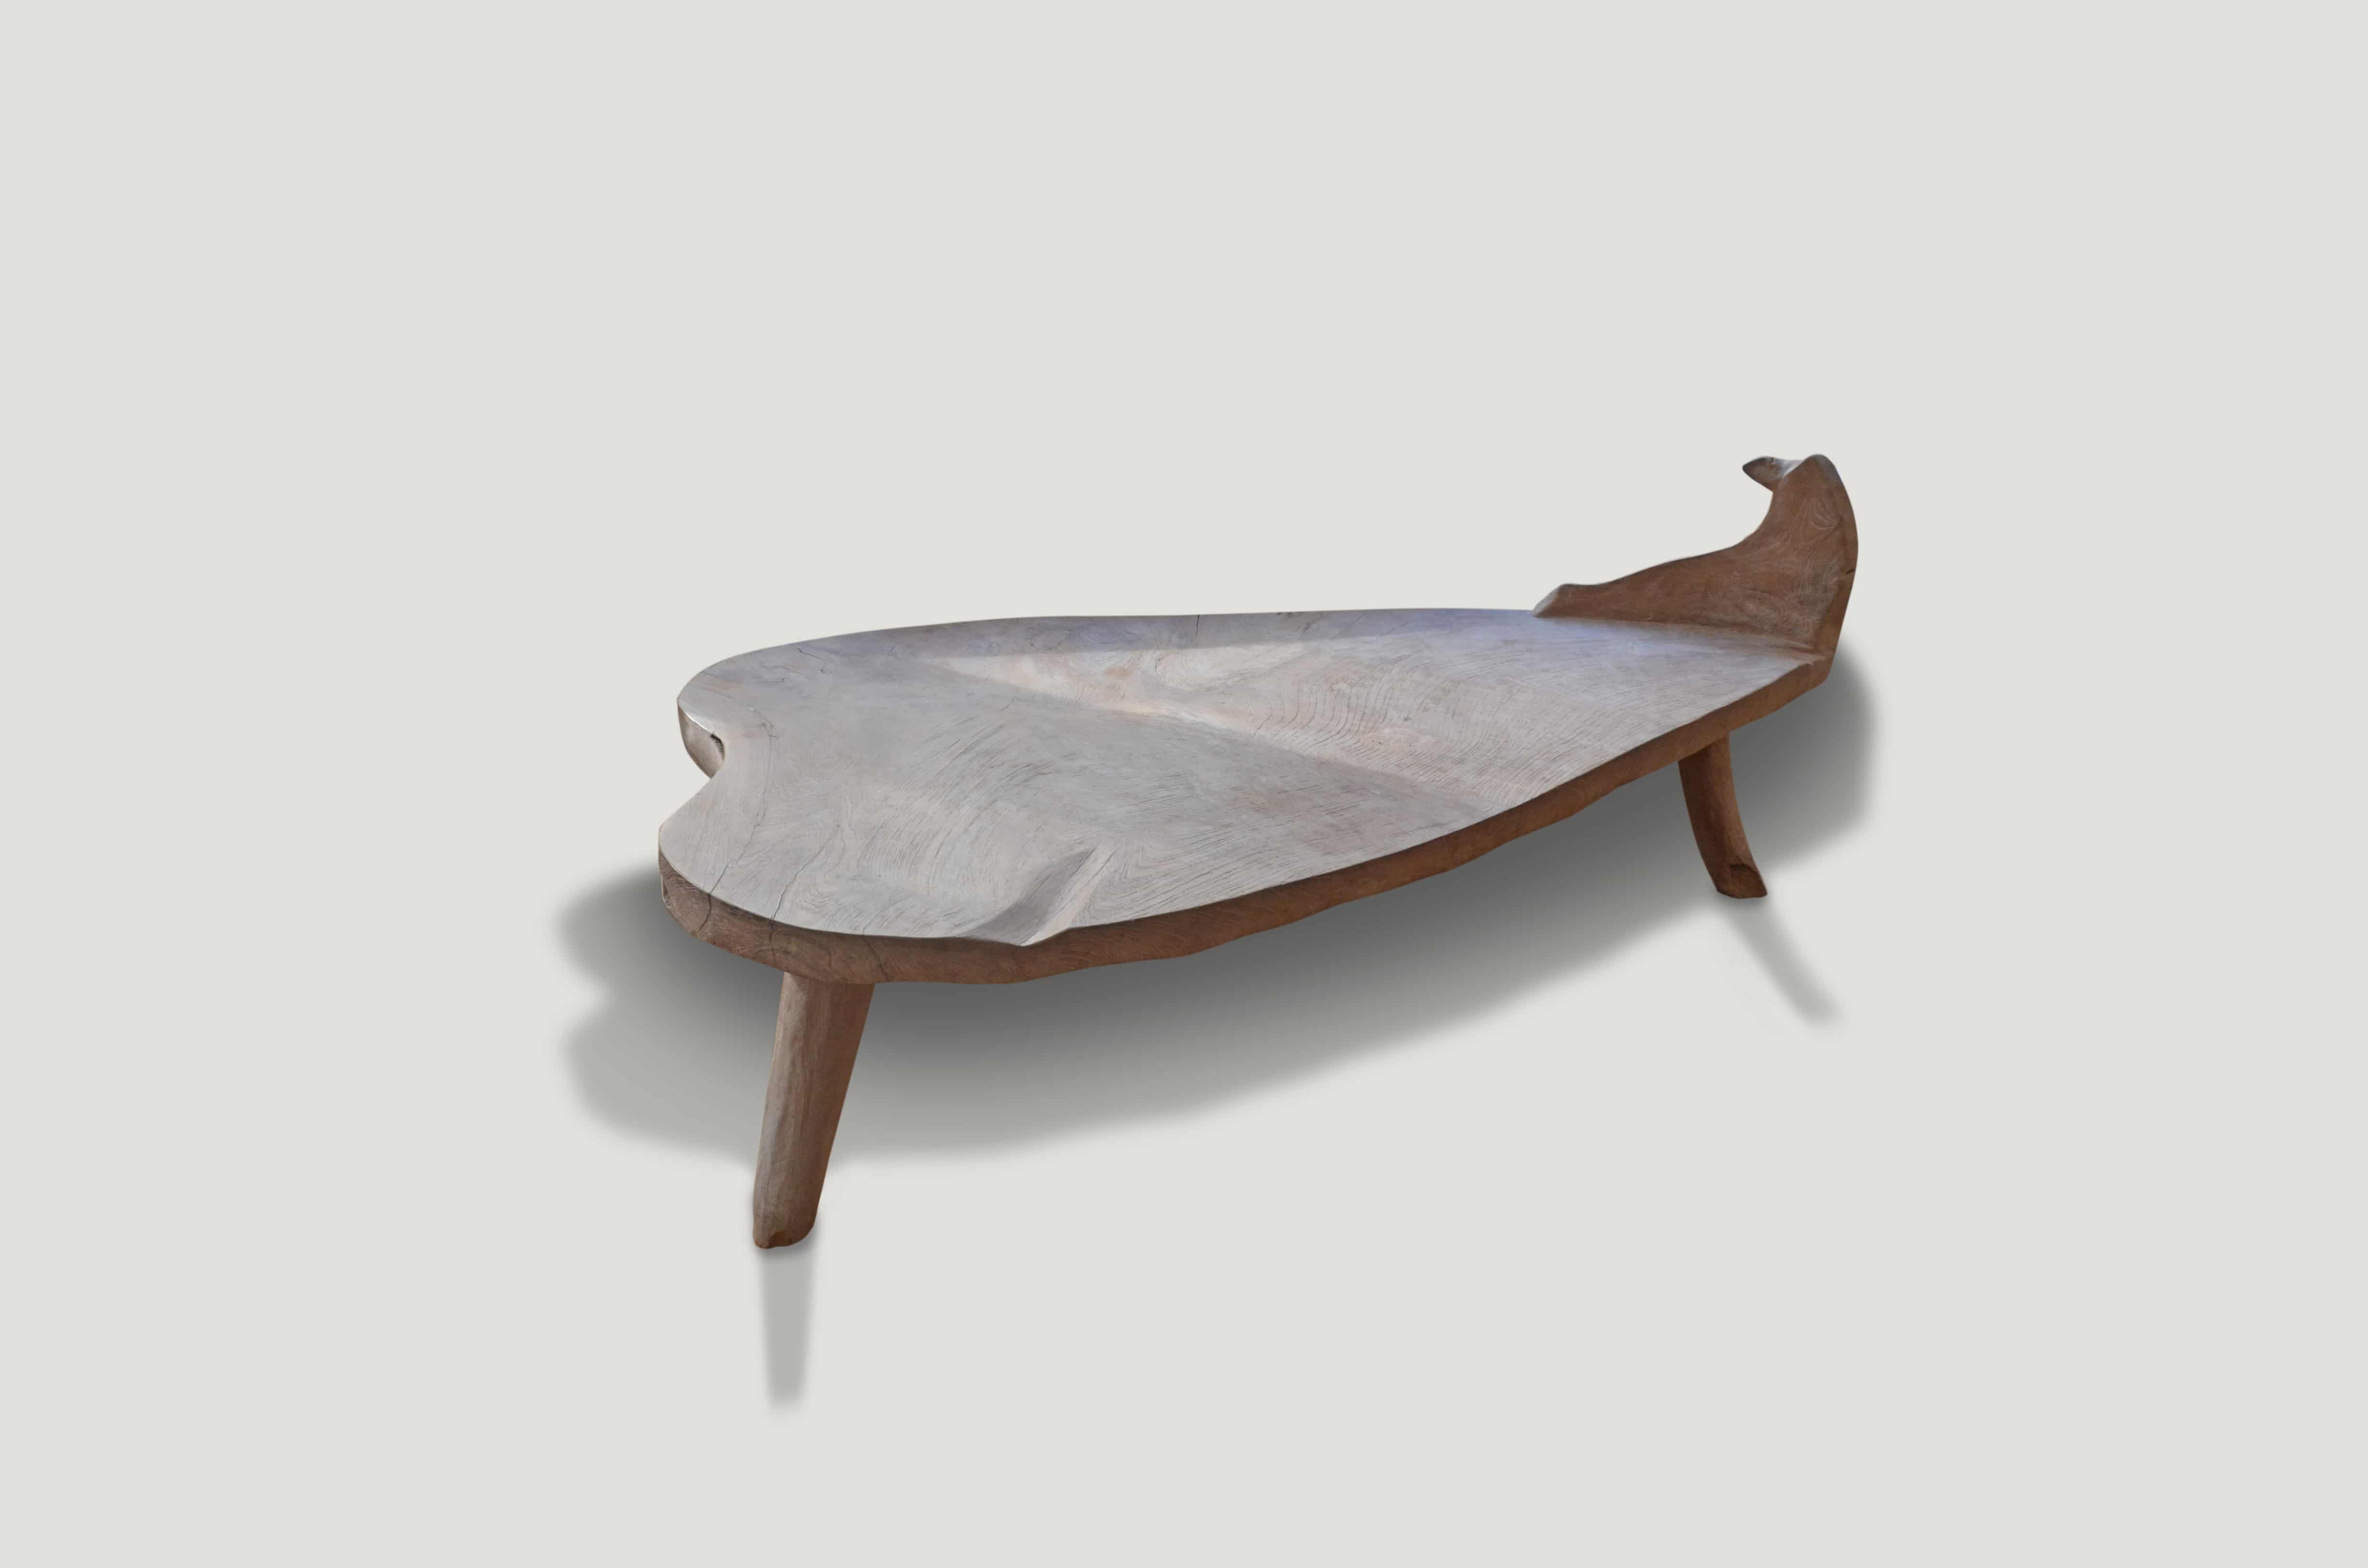 HAND CARVED TEAK PRIMITIVE CHAISE